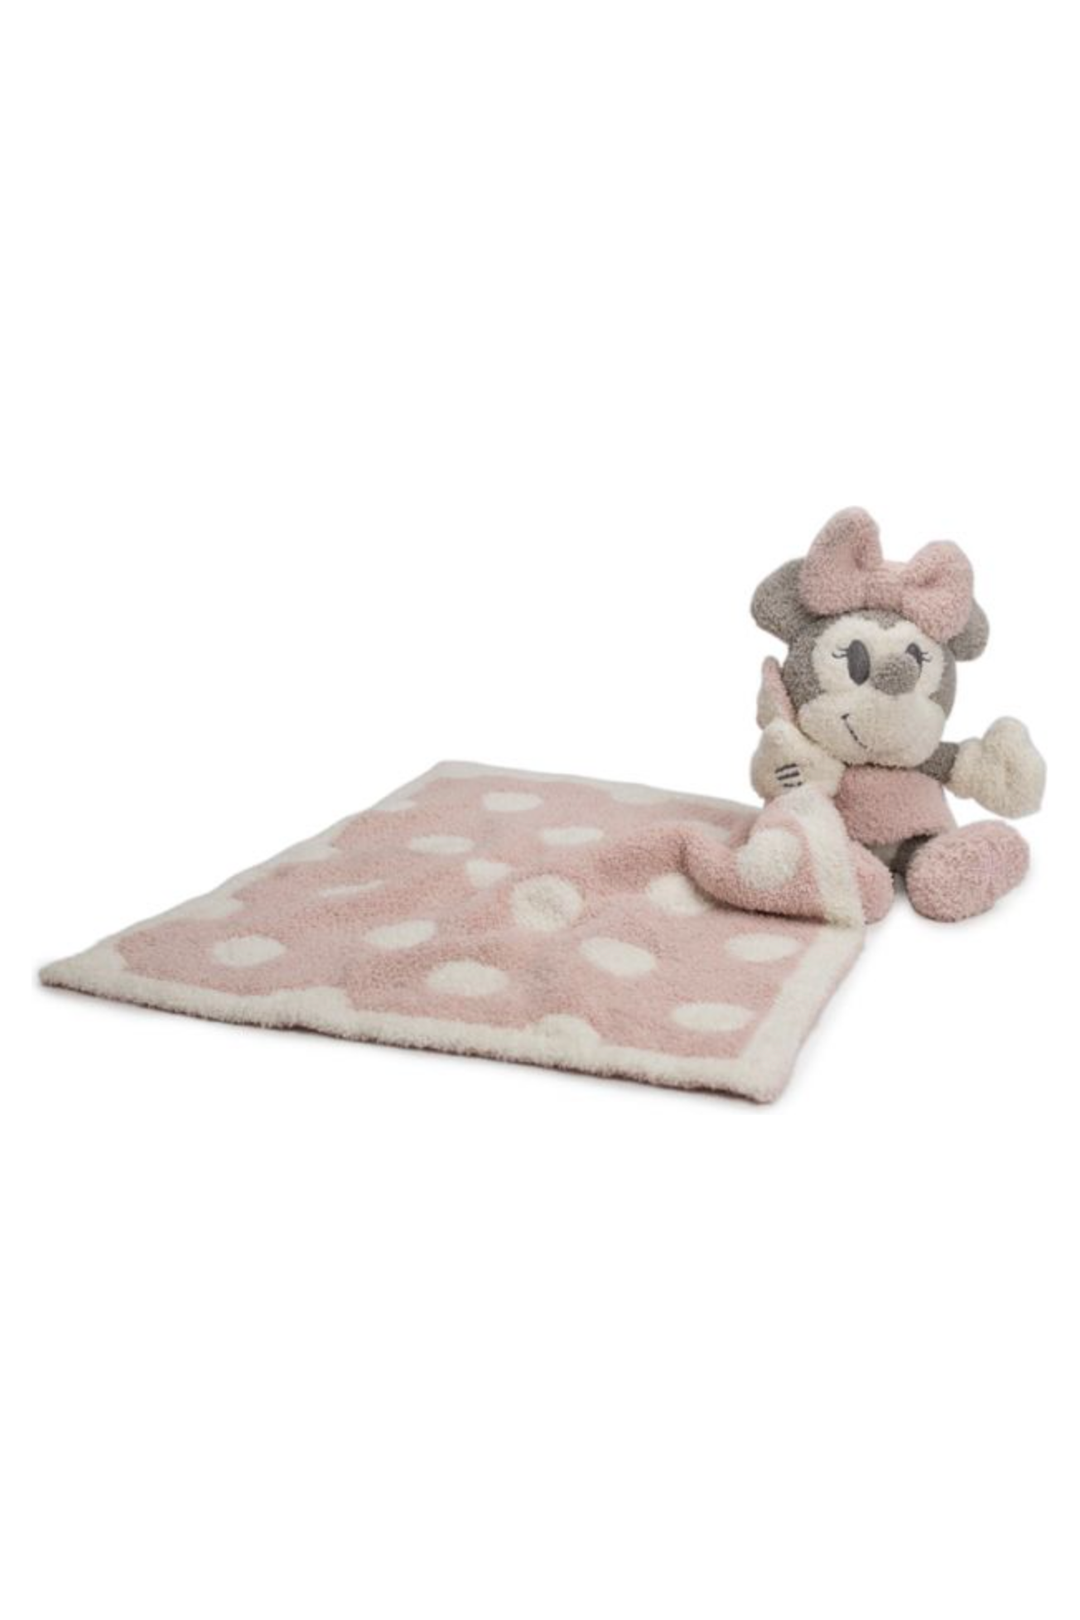 MINNIE MOUSE BUDDY BLANKET